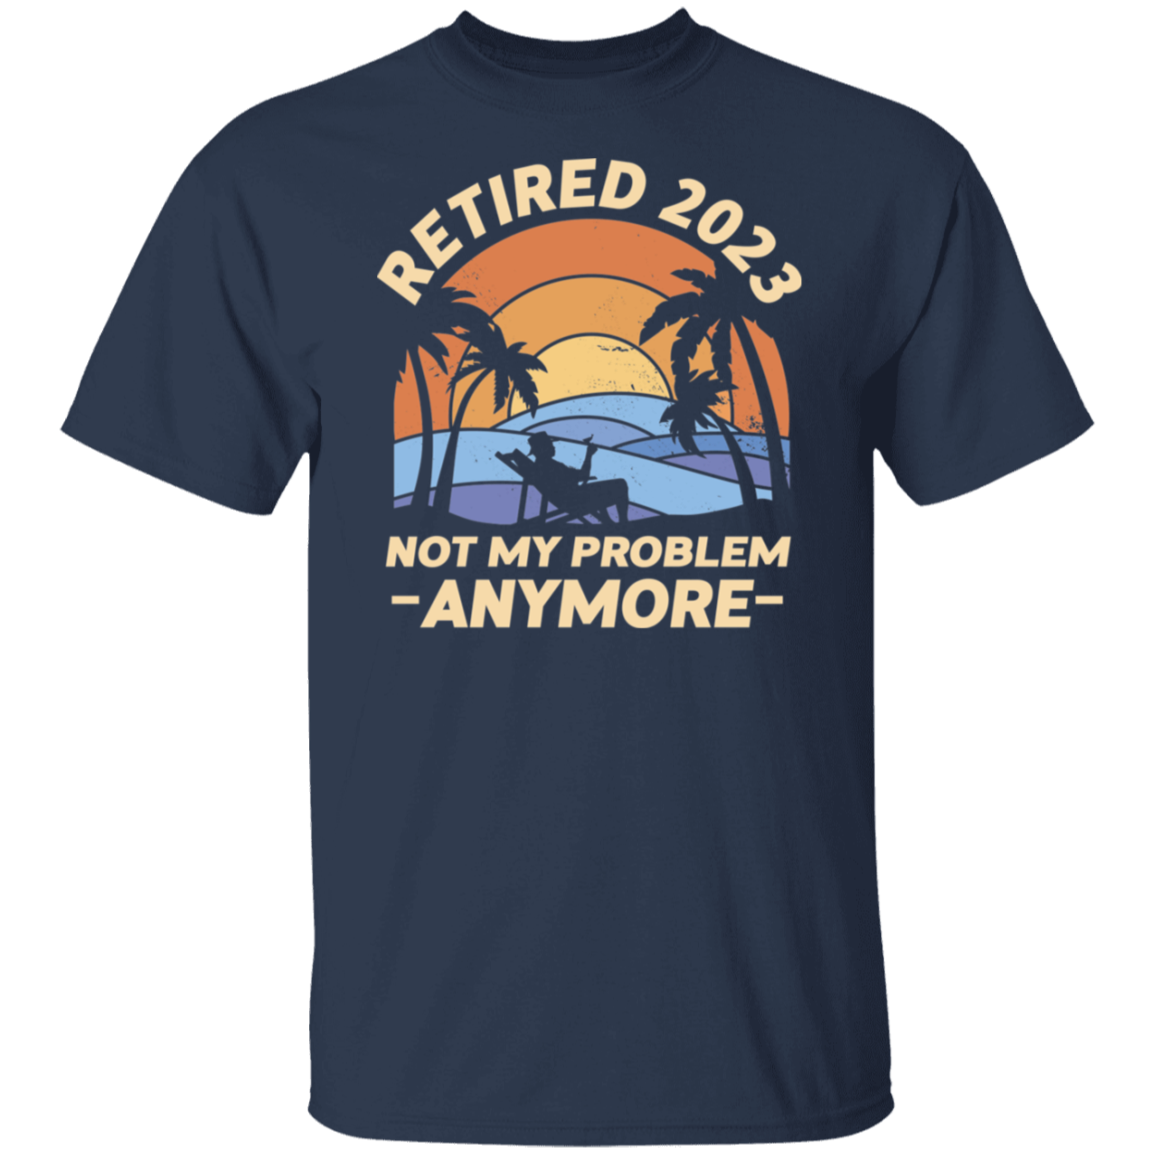 Retired 2023 Not My Problem T-Shirt